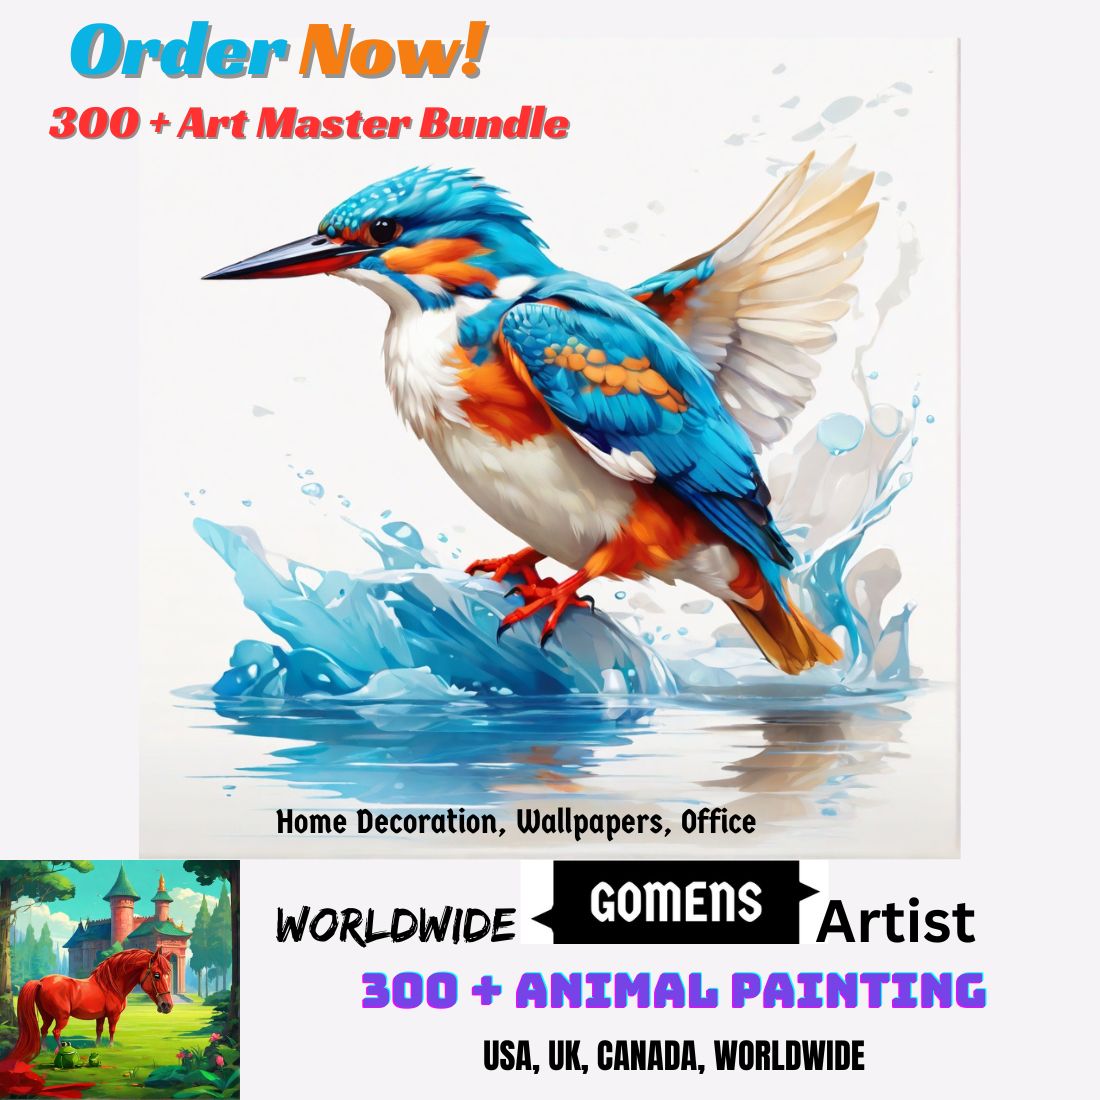 Unique Animal Art 300 Plus Master Bundle Worldwide Buy Now - On Latest Low Price preview image.